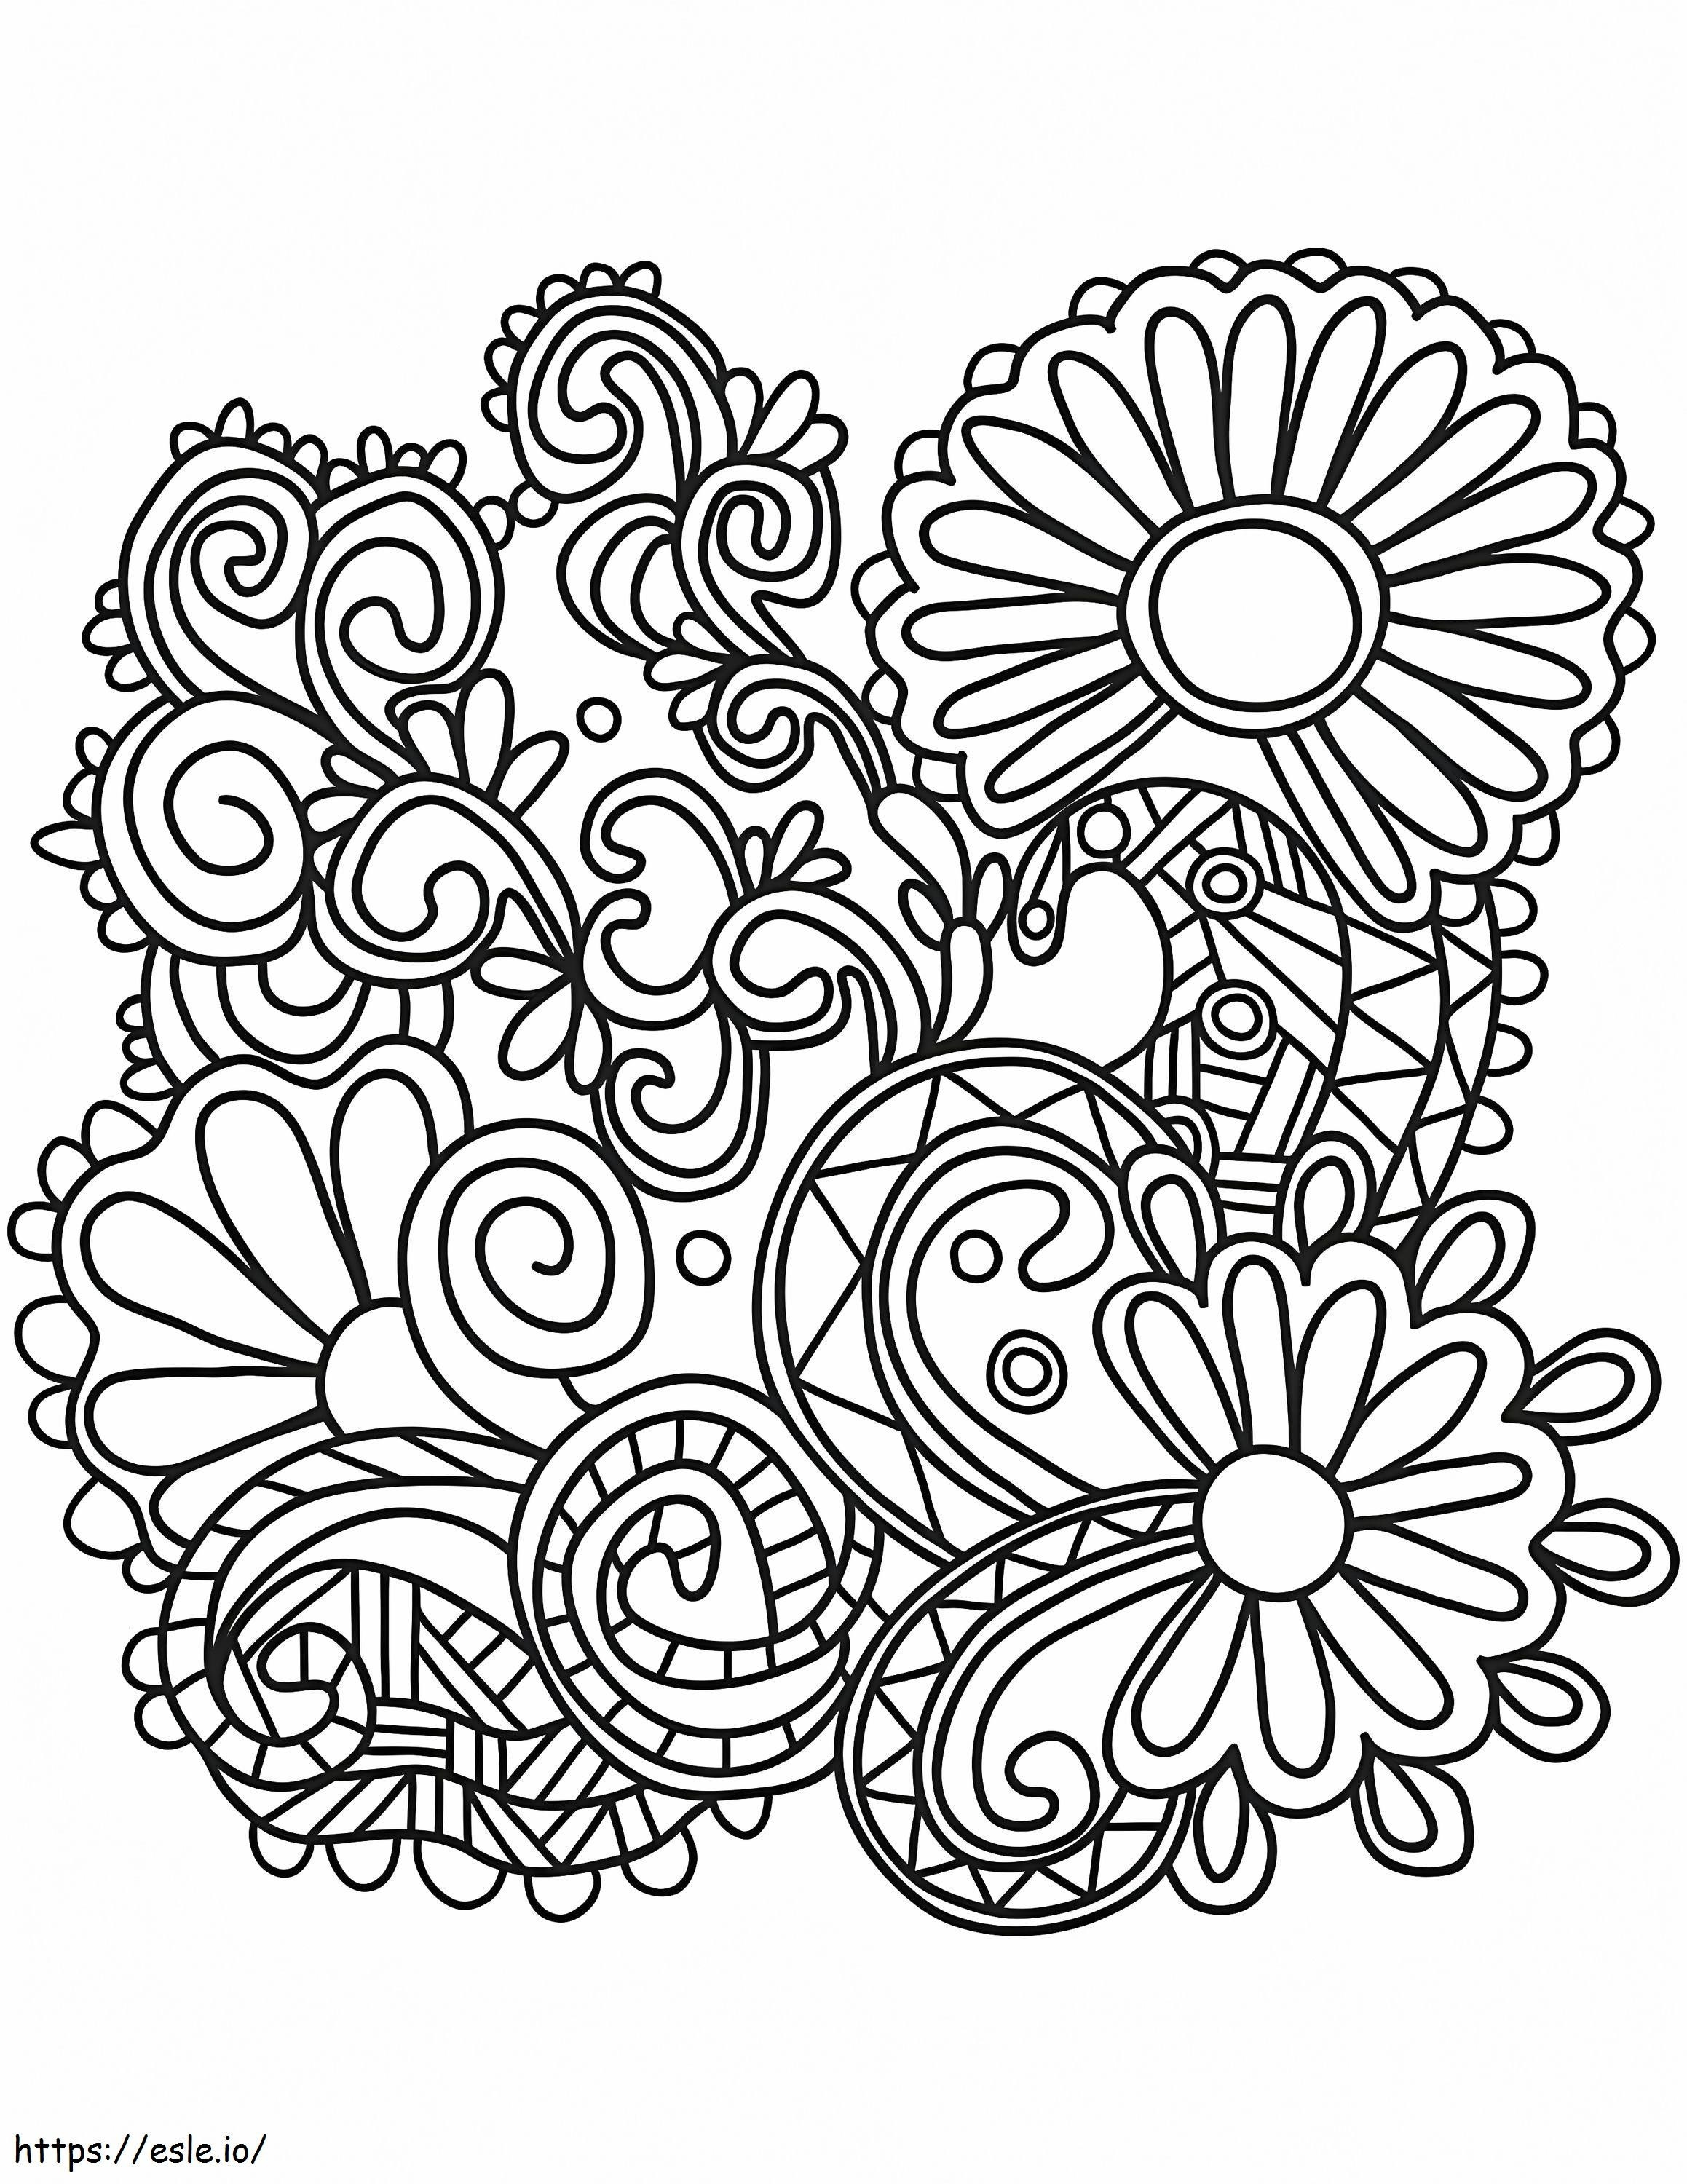 Abstract Doodle coloring page